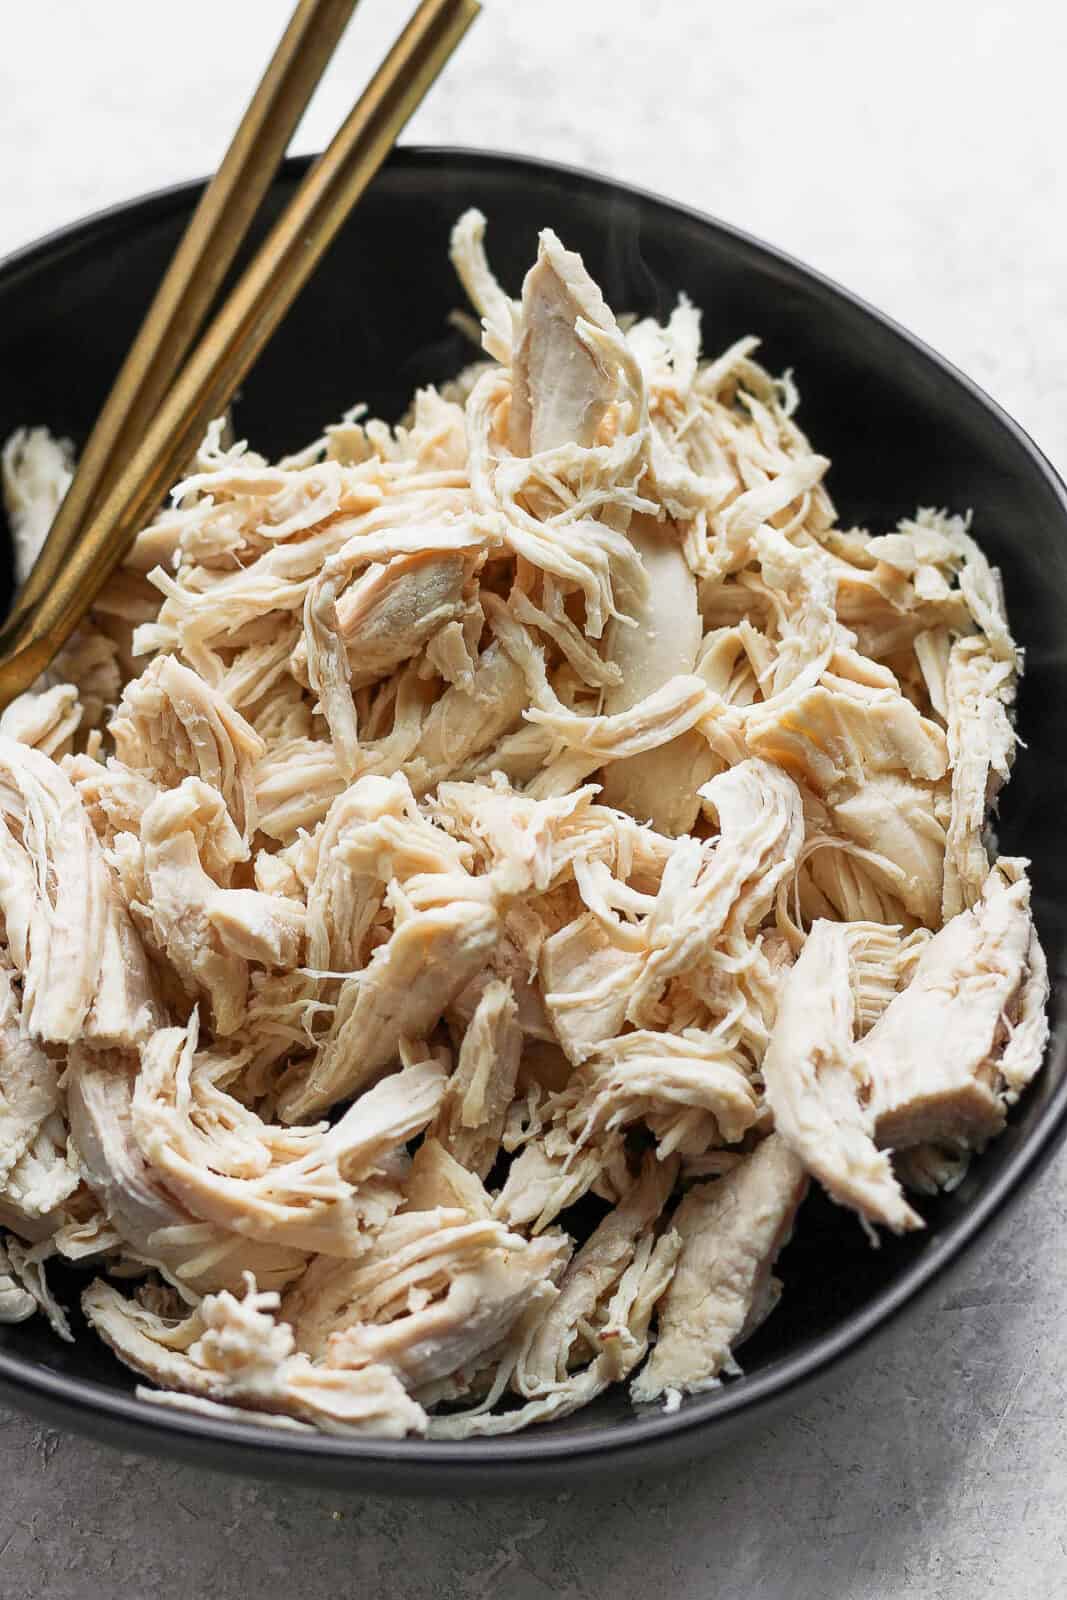 Shredded poached chicken in a black blow with two gold forks.